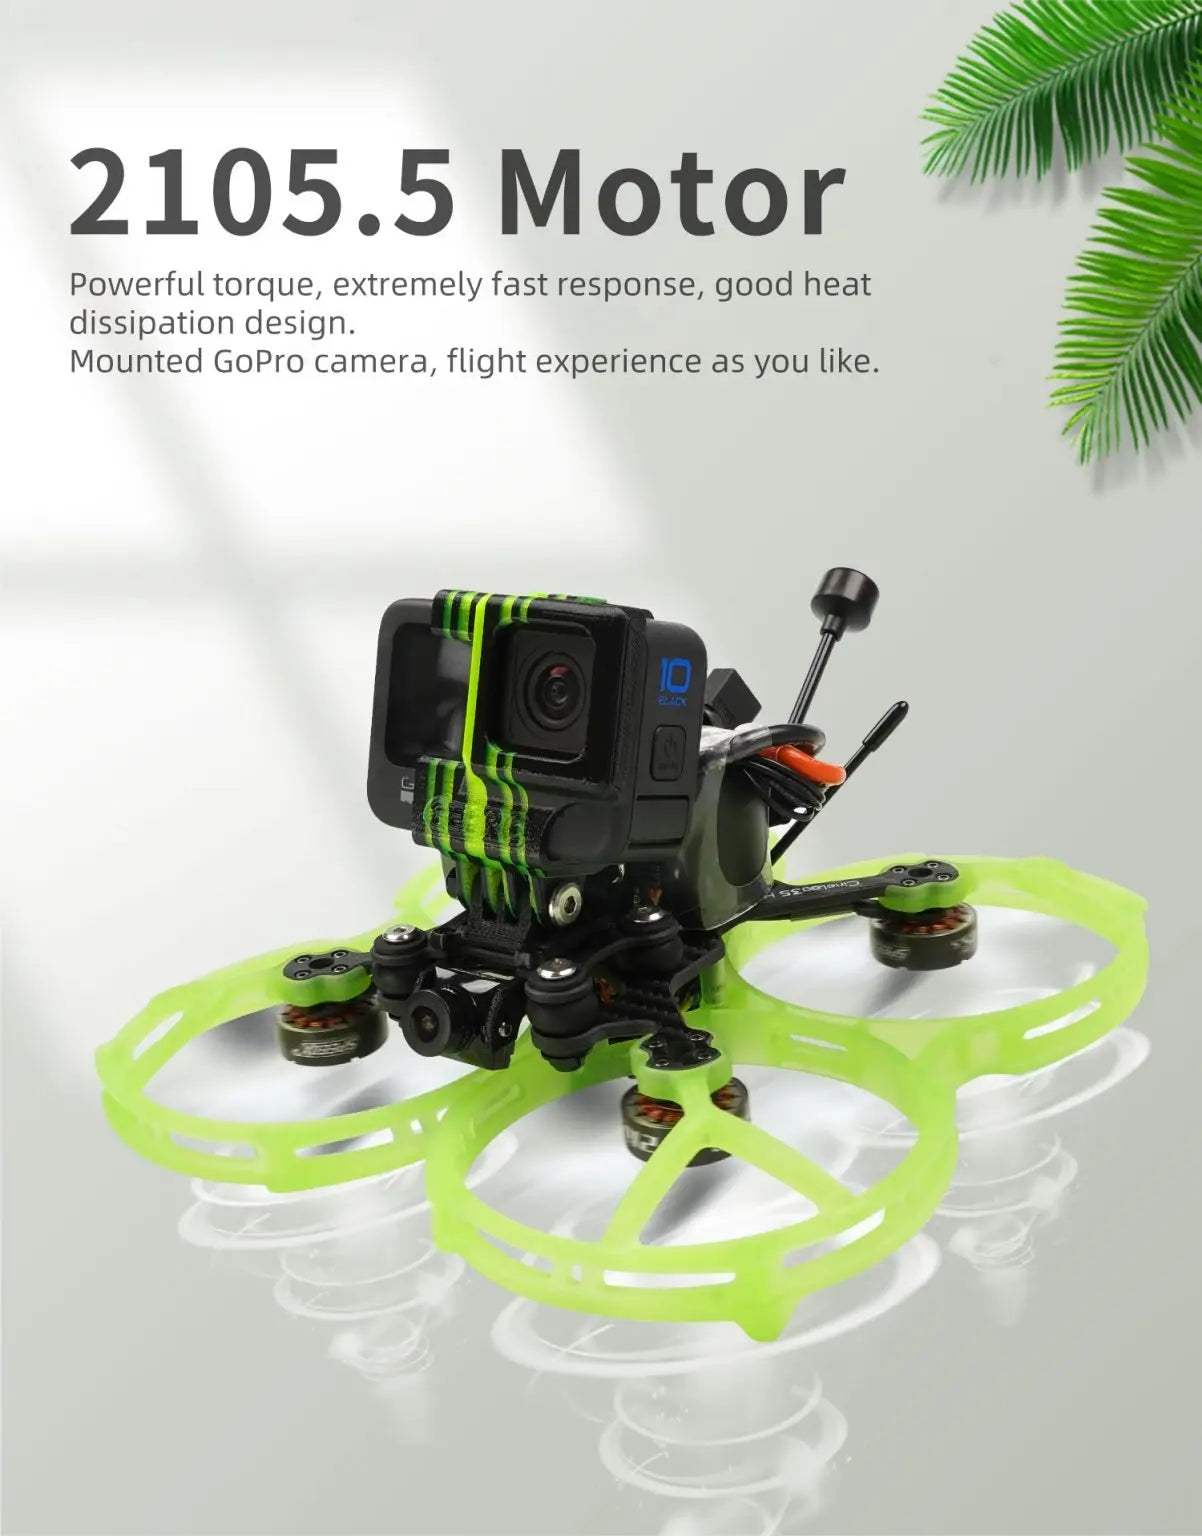 GEPRC CineLog35 FPV Drone, 2105.5 Motor Powerful torque, extremely fast response, heat dissipation design